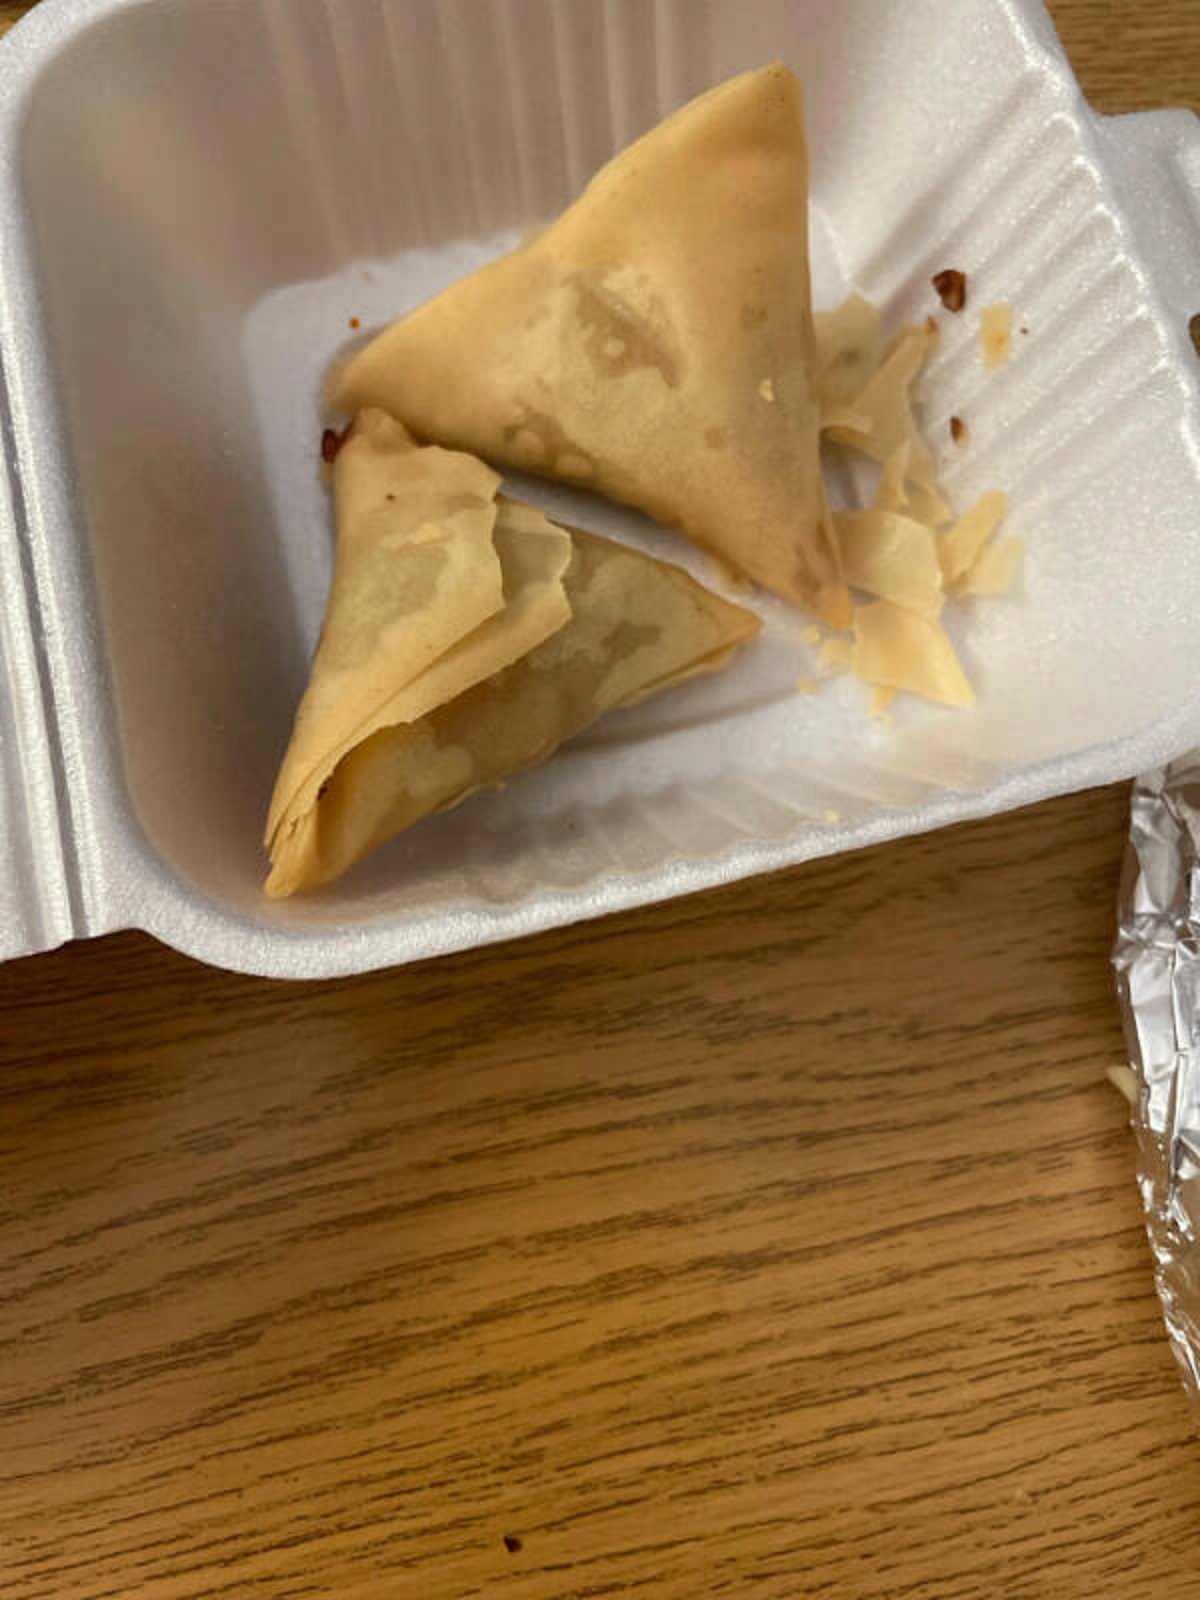 “These are my $5.99 samosas :(“